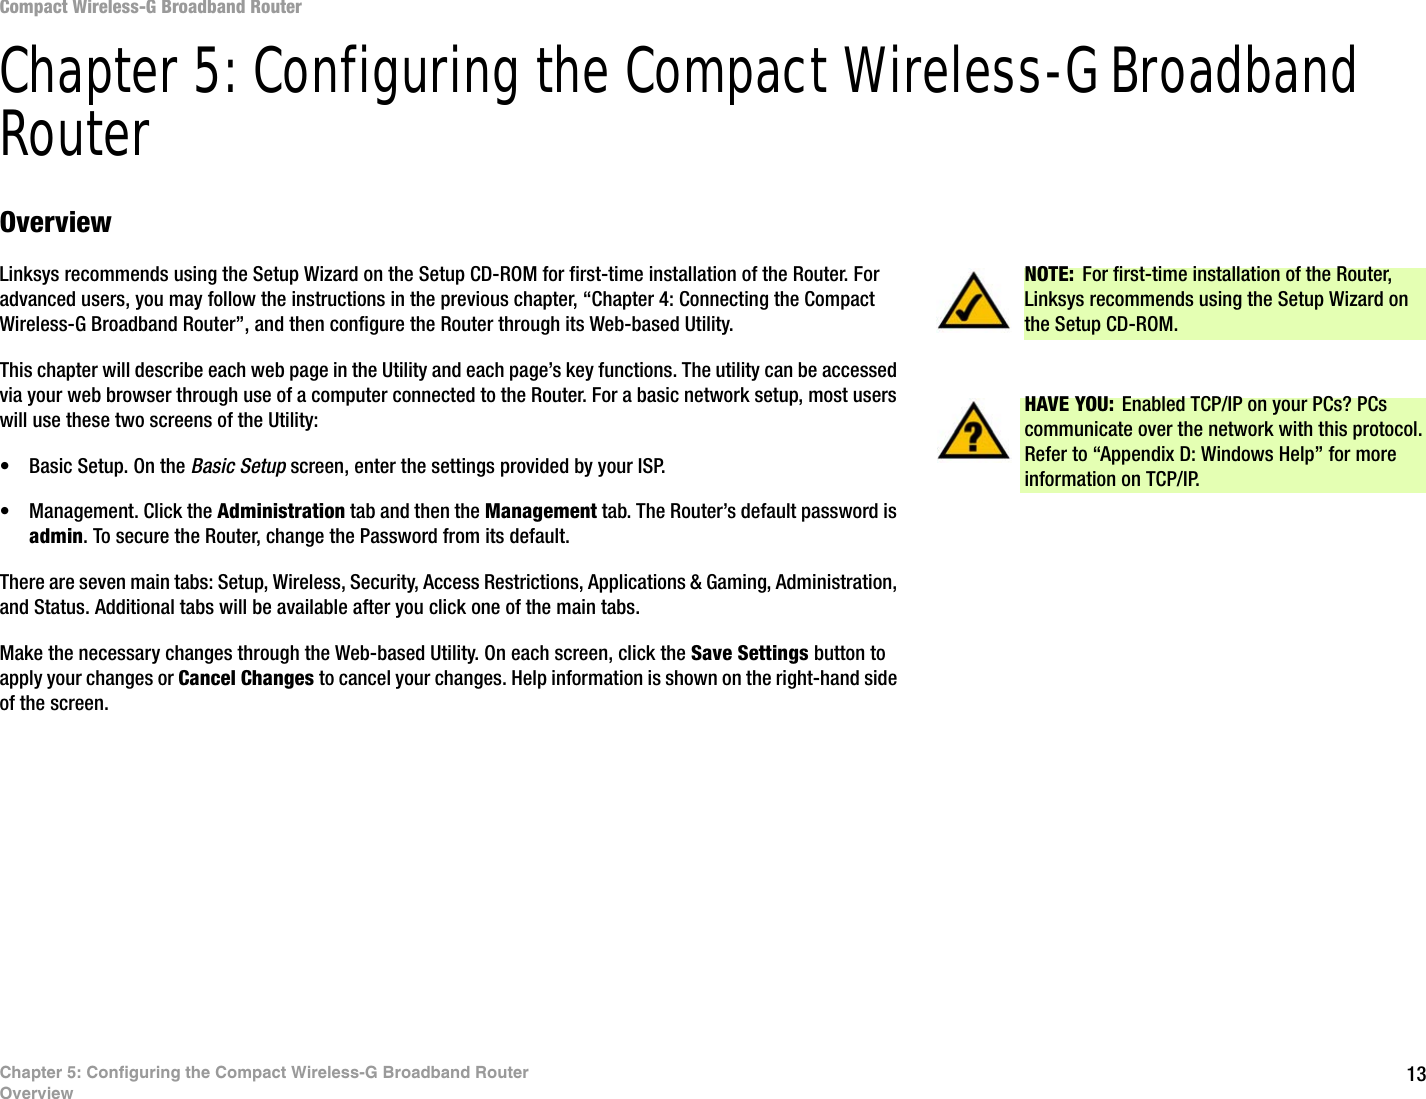 13Chapter 5: Configuring the Compact Wireless-G Broadband RouterOverviewCompact Wireless-G Broadband RouterChapter 5: Configuring the Compact Wireless-G Broadband RouterOverviewLinksys recommends using the Setup Wizard on the Setup CD-ROM for first-time installation of the Router. For advanced users, you may follow the instructions in the previous chapter, “Chapter 4: Connecting the Compact Wireless-G Broadband Router”, and then configure the Router through its Web-based Utility.This chapter will describe each web page in the Utility and each page’s key functions. The utility can be accessed via your web browser through use of a computer connected to the Router. For a basic network setup, most users will use these two screens of the Utility:• Basic Setup. On the Basic Setup screen, enter the settings provided by your ISP.• Management. Click the Administration tab and then the Management tab. The Router’s default password is admin. To secure the Router, change the Password from its default.There are seven main tabs: Setup, Wireless, Security, Access Restrictions, Applications &amp; Gaming, Administration, and Status. Additional tabs will be available after you click one of the main tabs.Make the necessary changes through the Web-based Utility. On each screen, click the Save Settings button to apply your changes or Cancel Changes to cancel your changes. Help information is shown on the right-hand side of the screen. HAVE YOU:  Enabled TCP/IP on your PCs? PCs communicate over the network with this protocol. Refer to “Appendix D: Windows Help” for more information on TCP/IP.NOTE: For first-time installation of the Router, Linksys recommends using the Setup Wizard on the Setup CD-ROM.